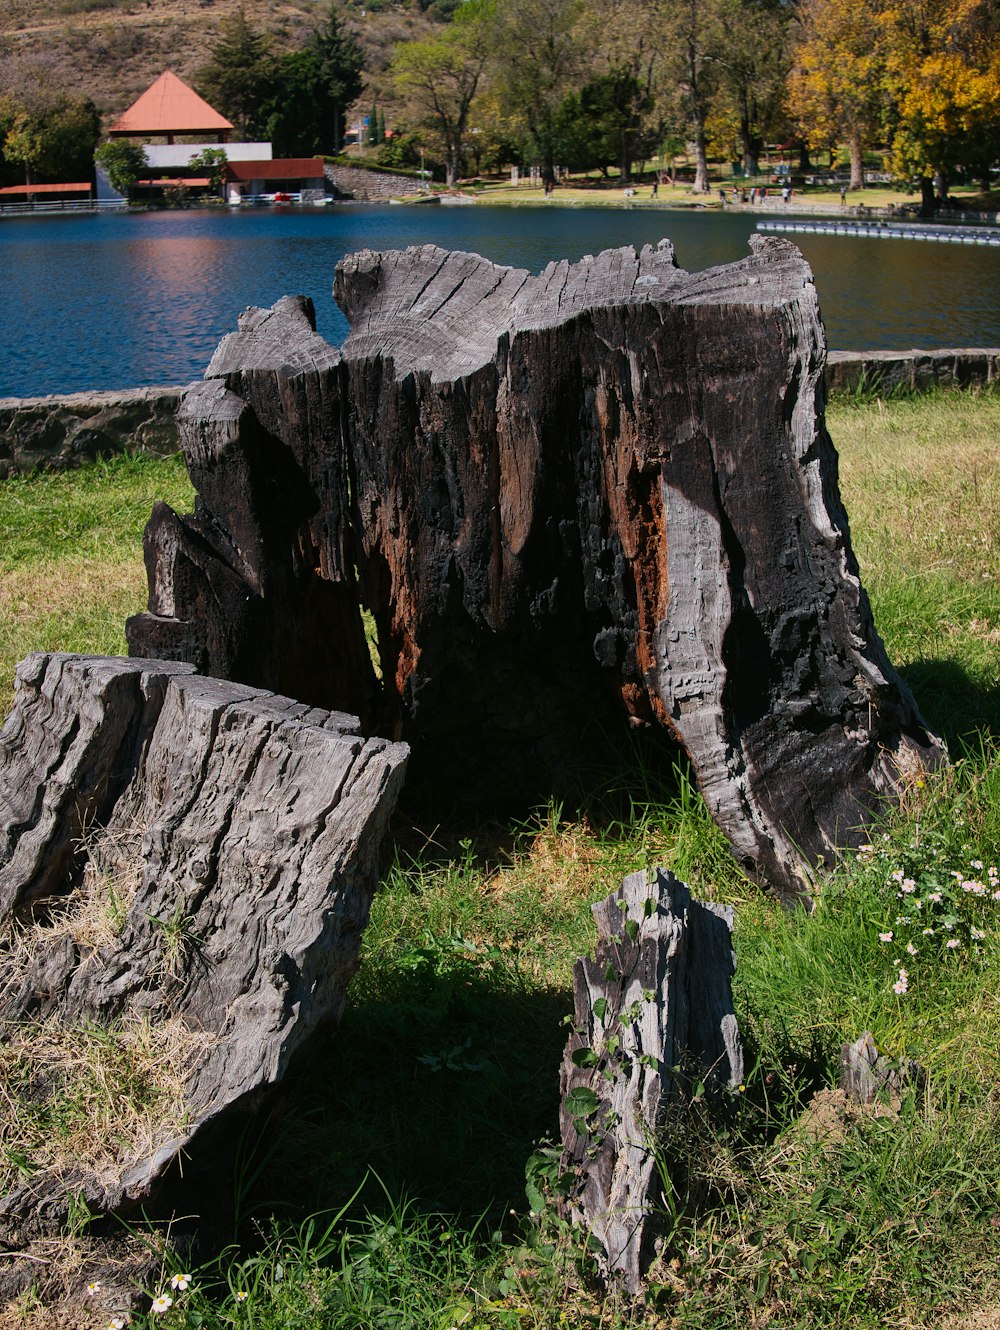 a large tree stump sitting in a field next to a lake